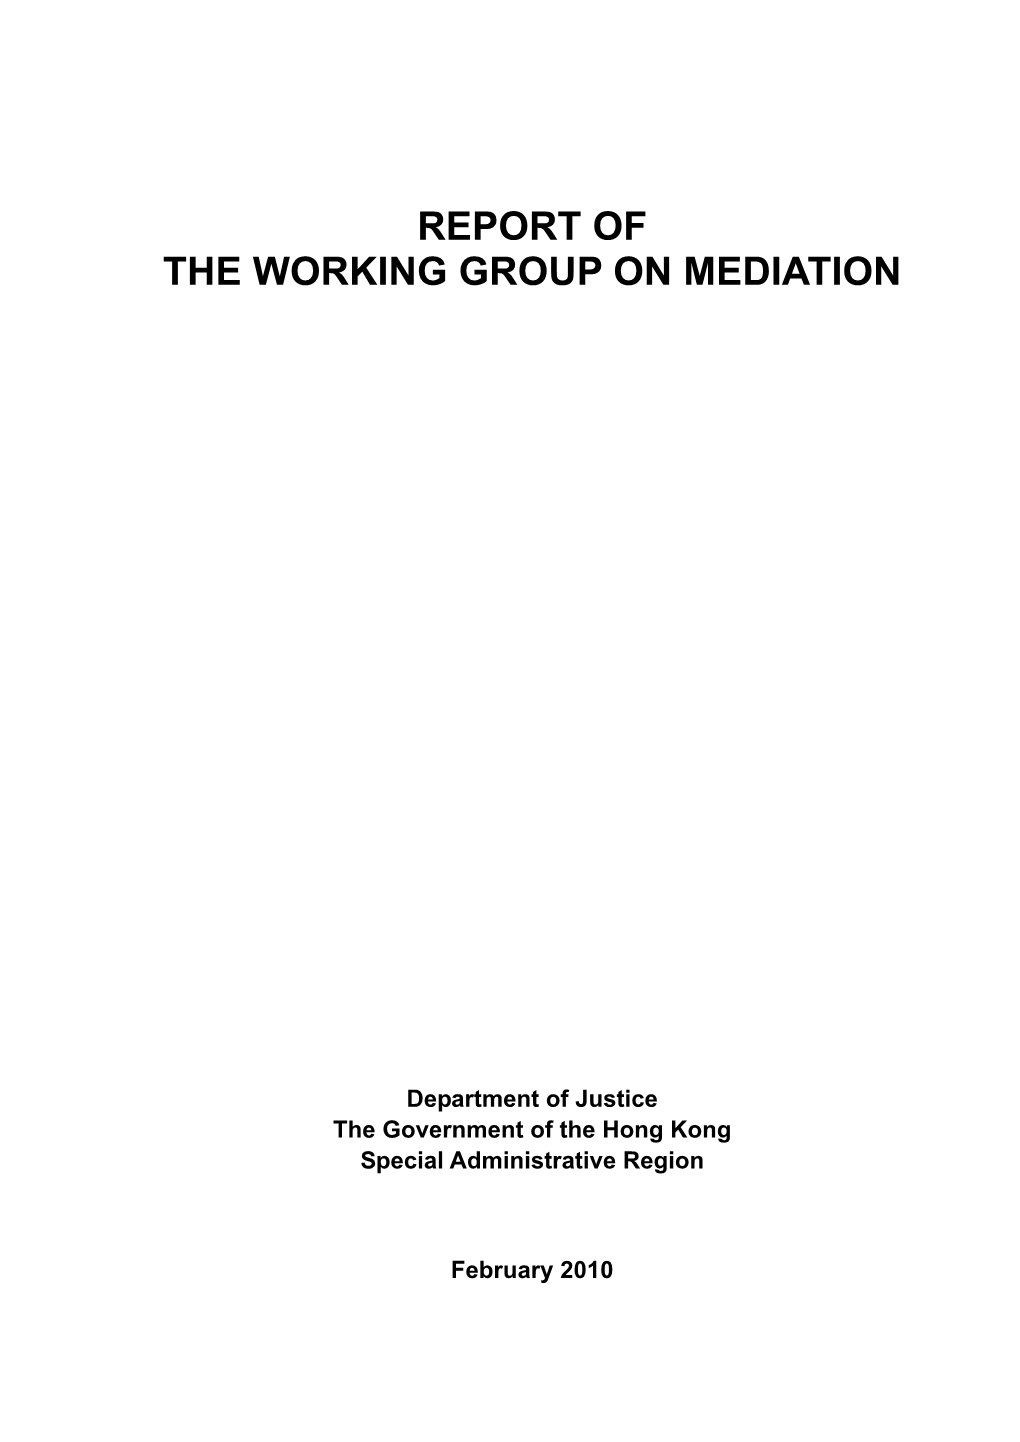 Report of the Working Group on Mediation